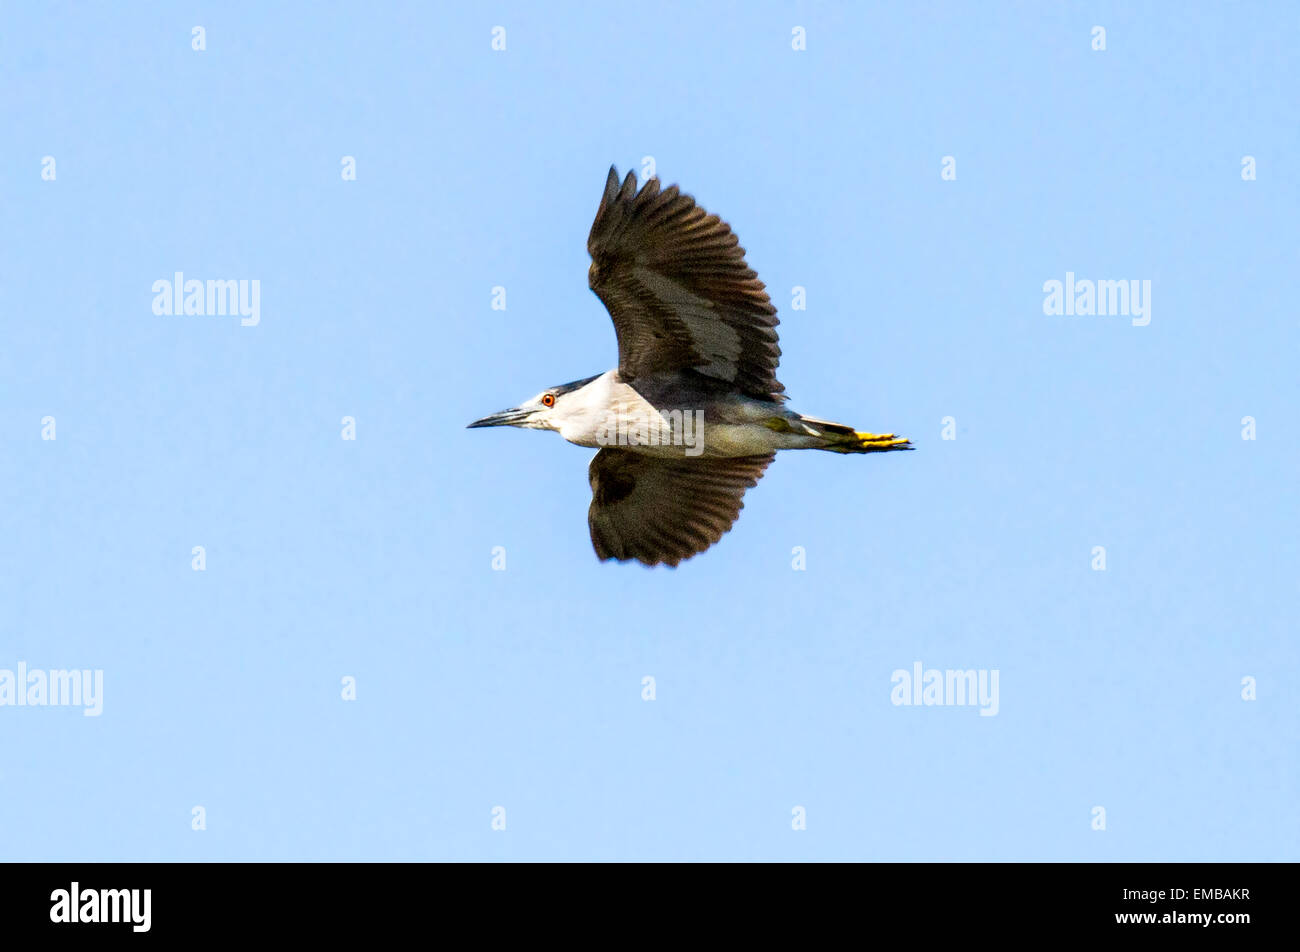 BLACK CROWNED NIGHT HERON (Nycticorax nycticorax) in flight Stock Photo